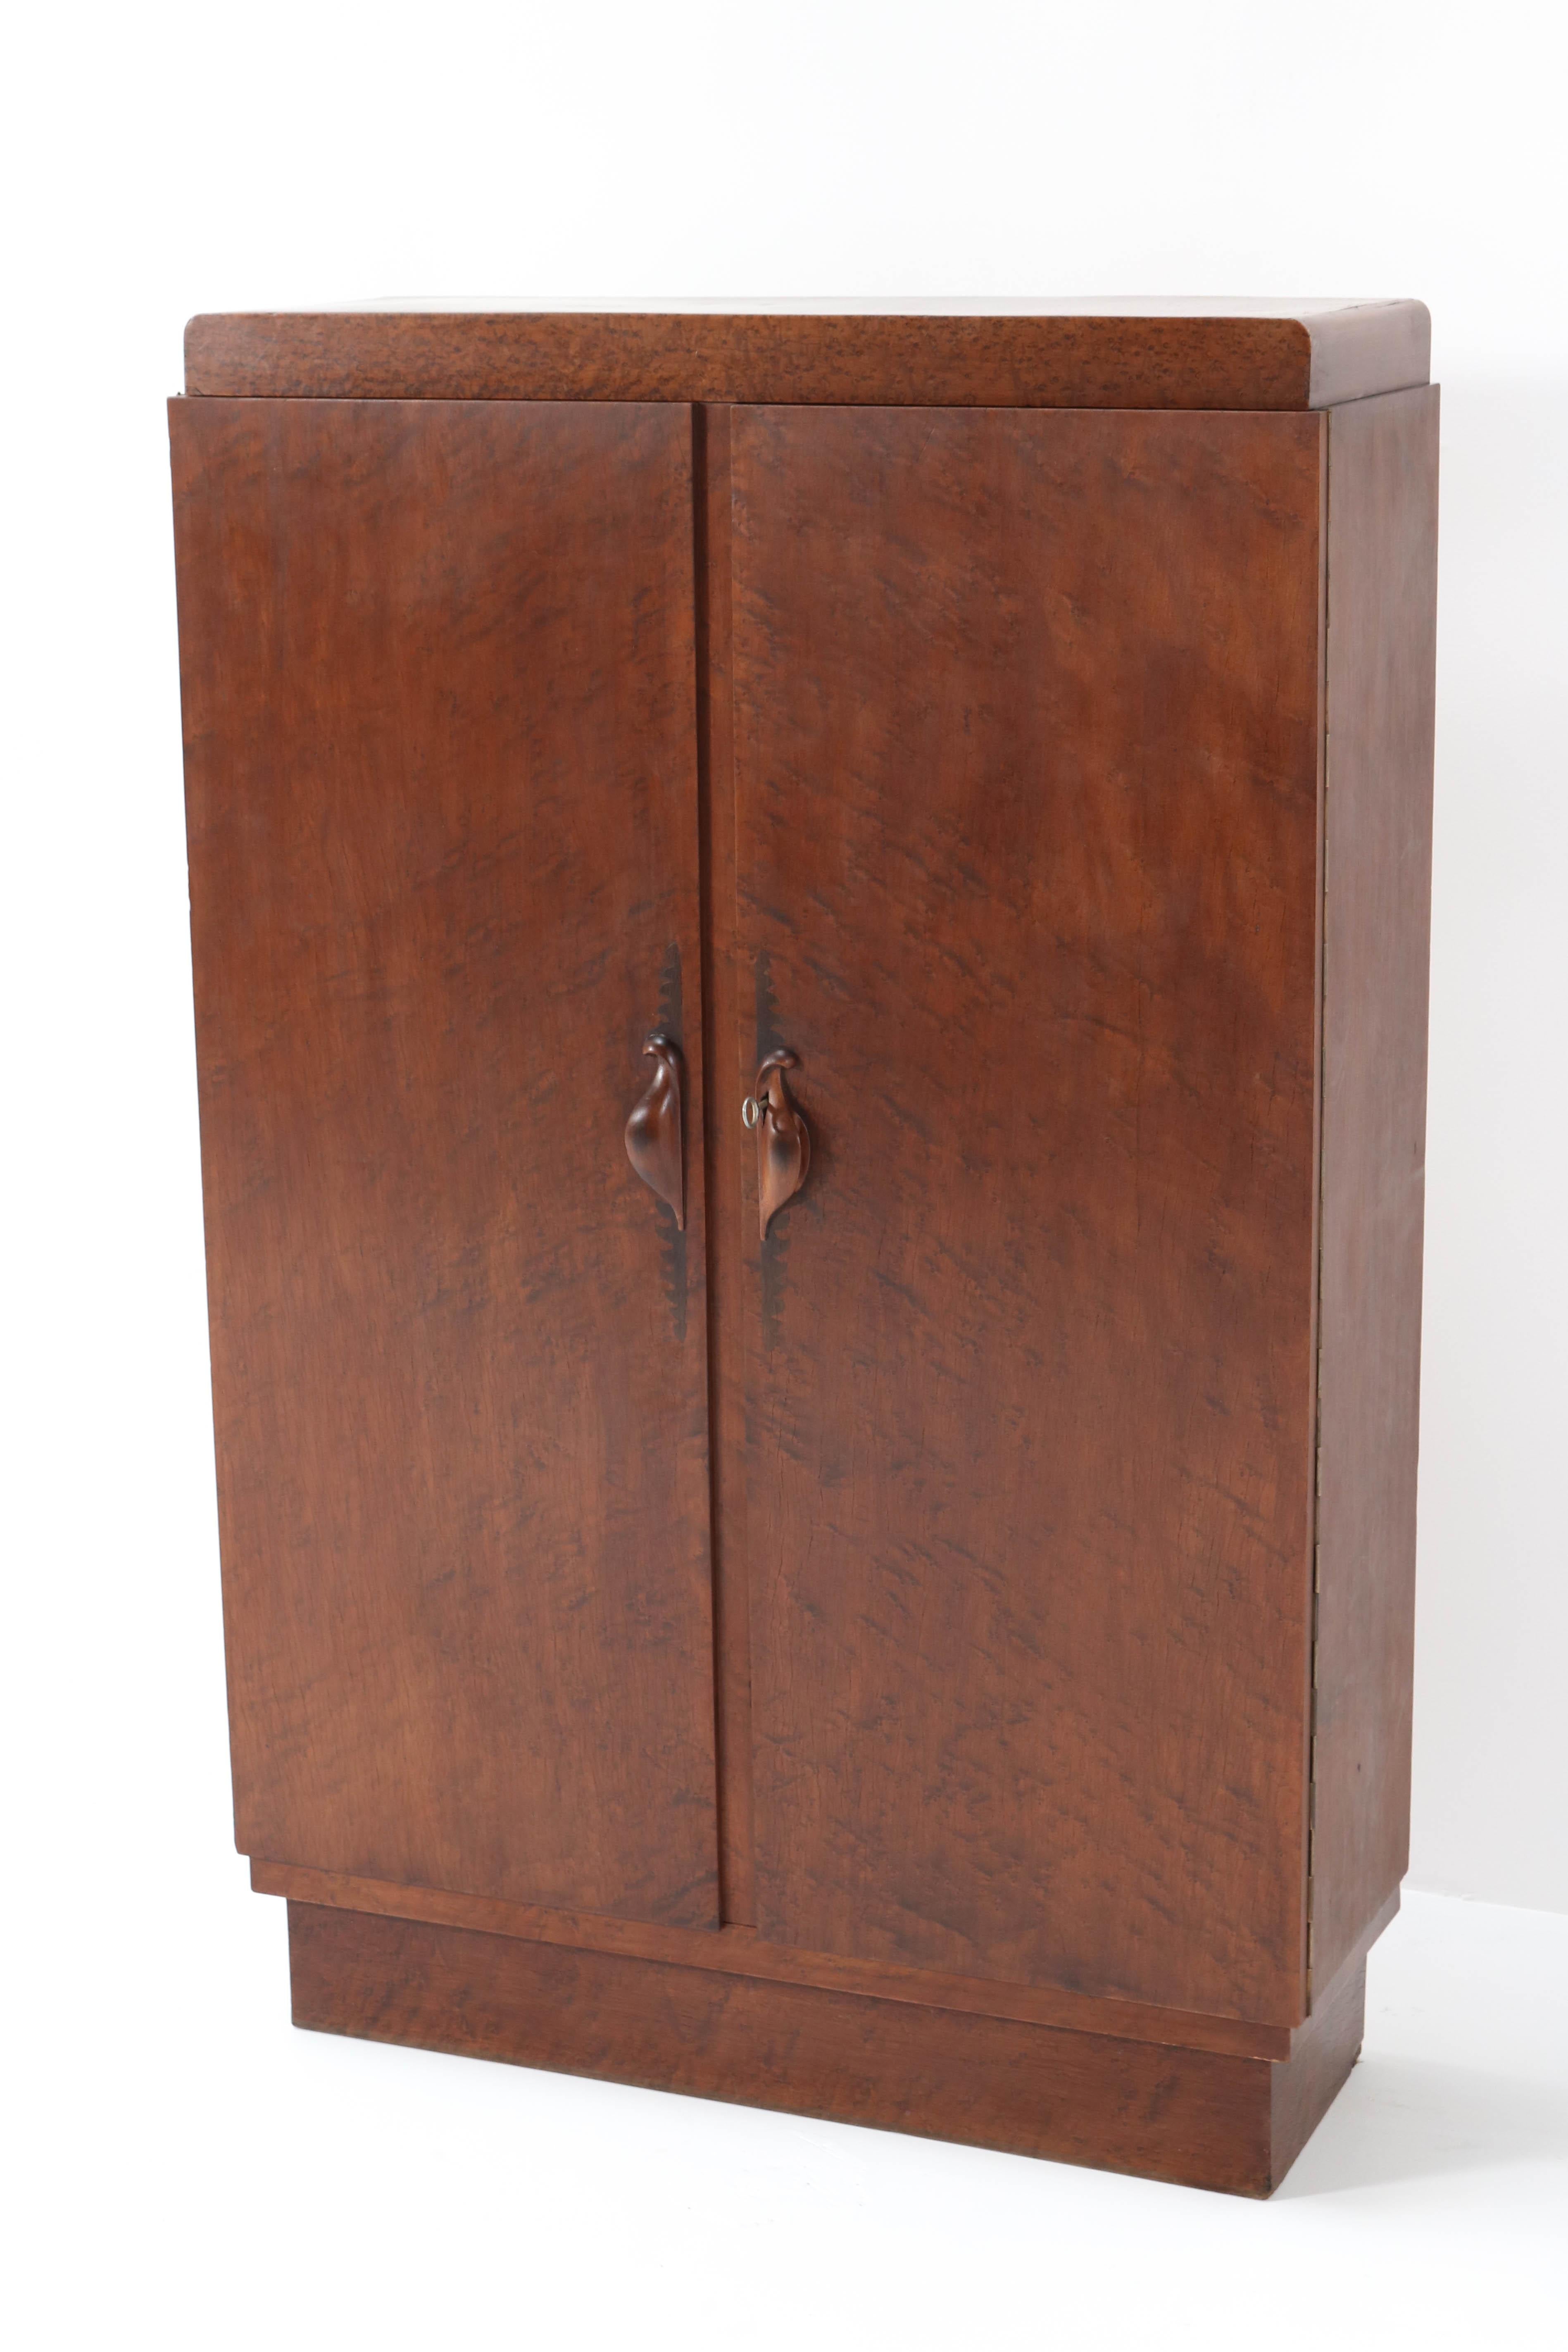 Early 20th Century Birdseye Maple Art Deco Amsterdam School Cabinet by 't Woonhuys Amsterdam, 1920s For Sale